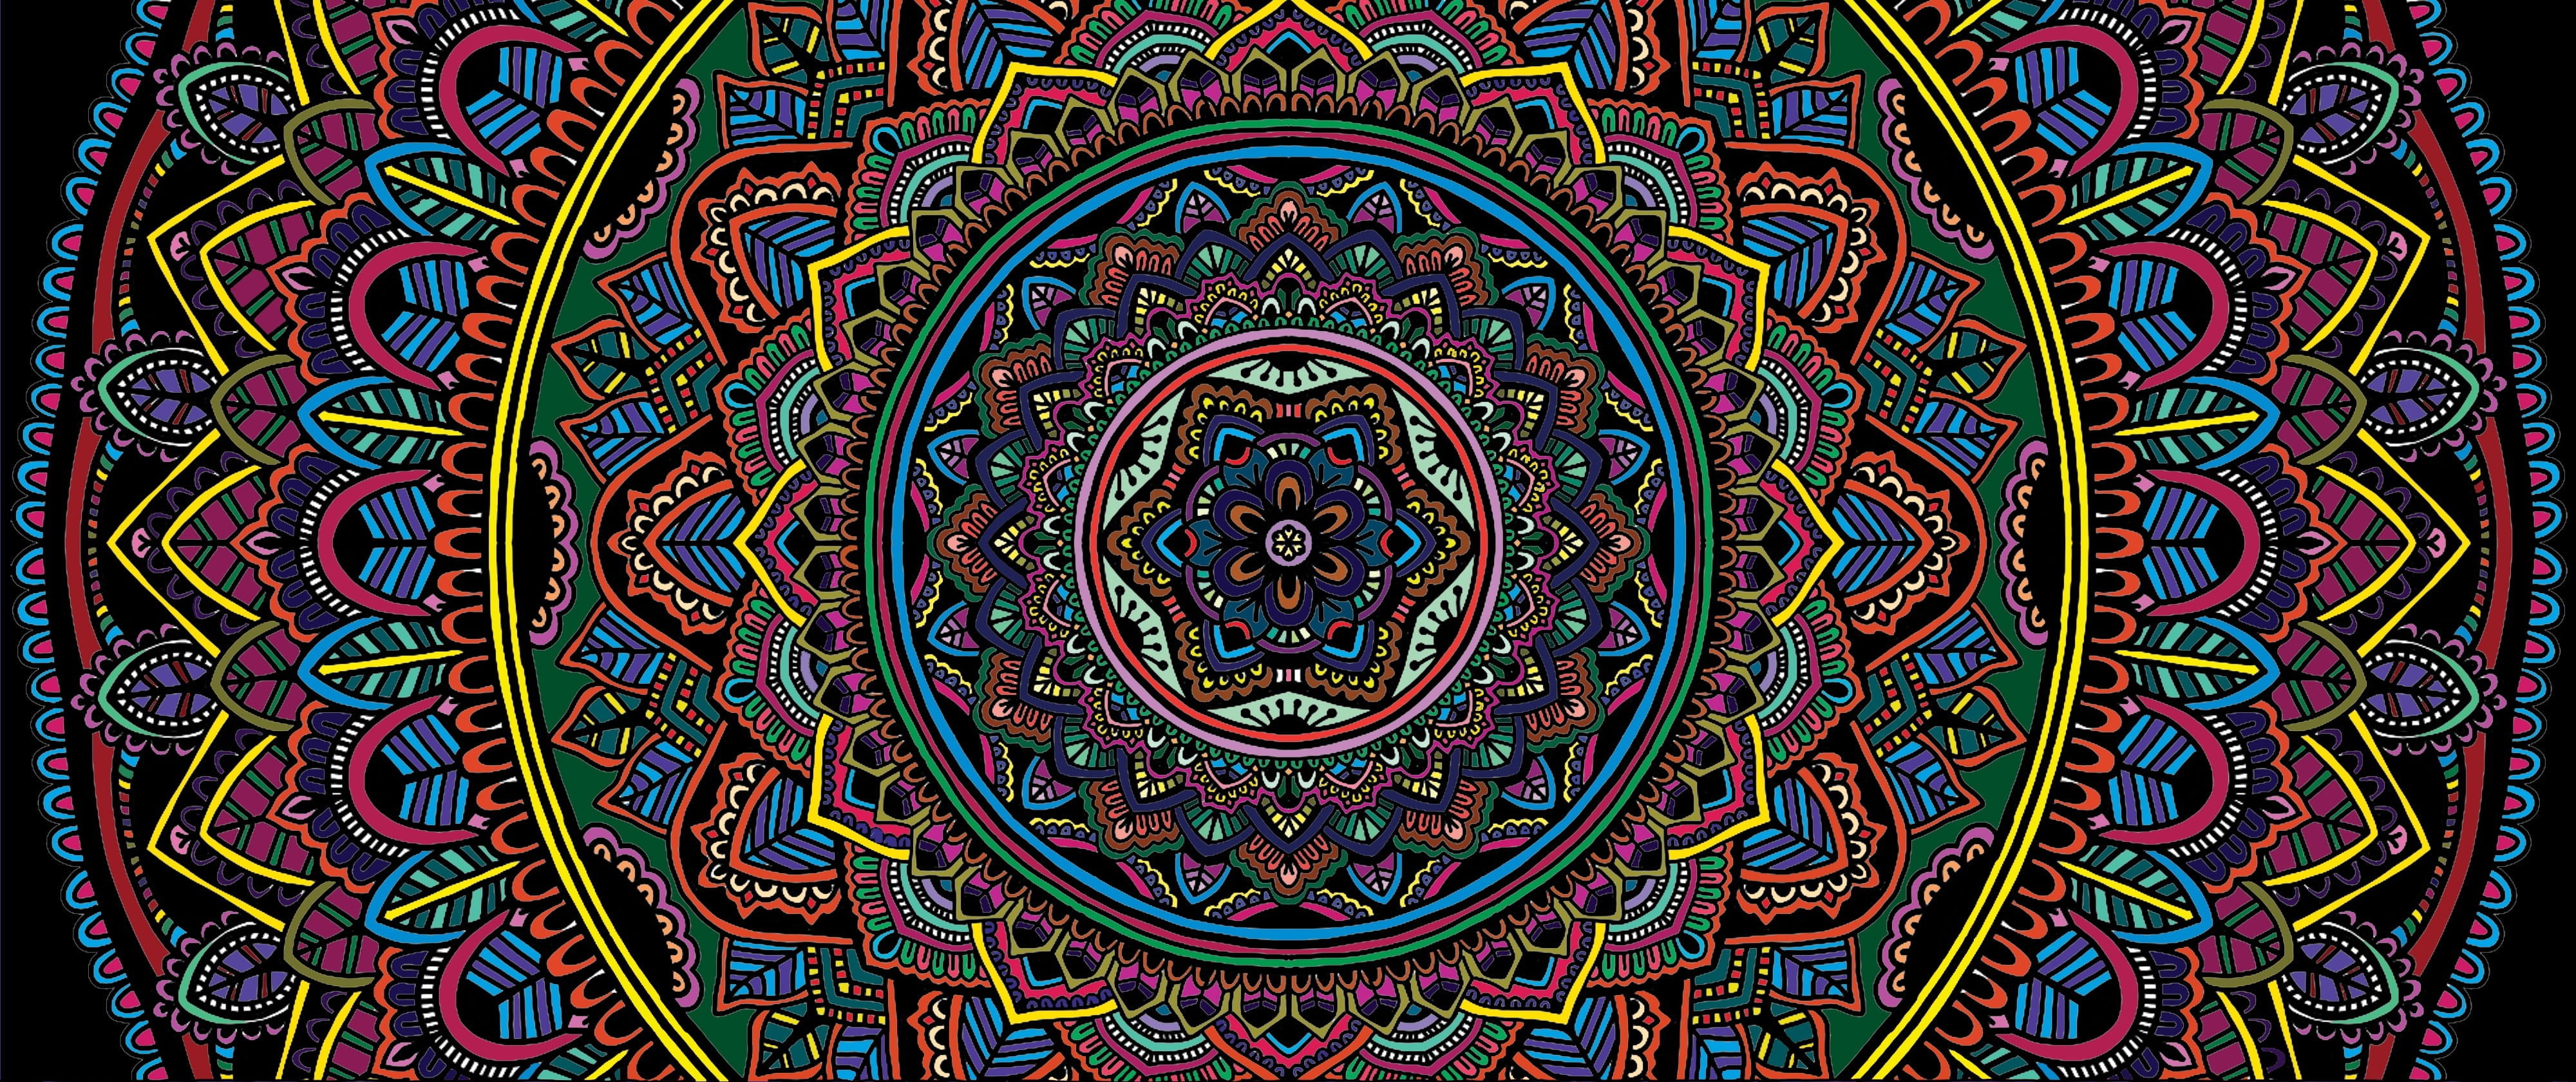 Mandala, colorful, abstract, texture, multi colored, pattern